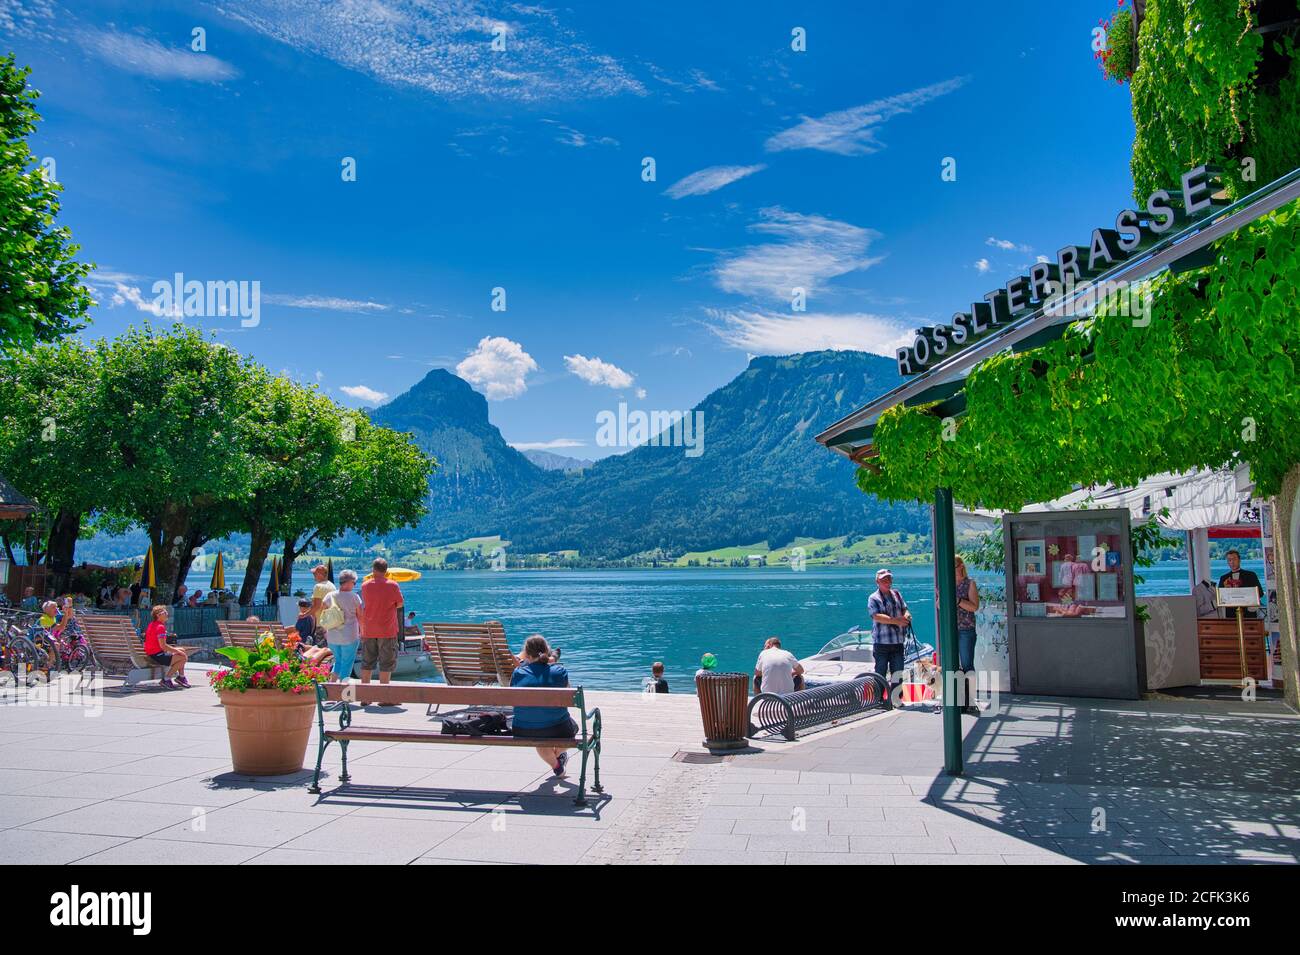 St. Wolfgang, Austria - July 09,2020: people at the lake Wolfgang with view to the famous terrace of the legendary White Horse Inn (Weisses Roessl) Stock Photo